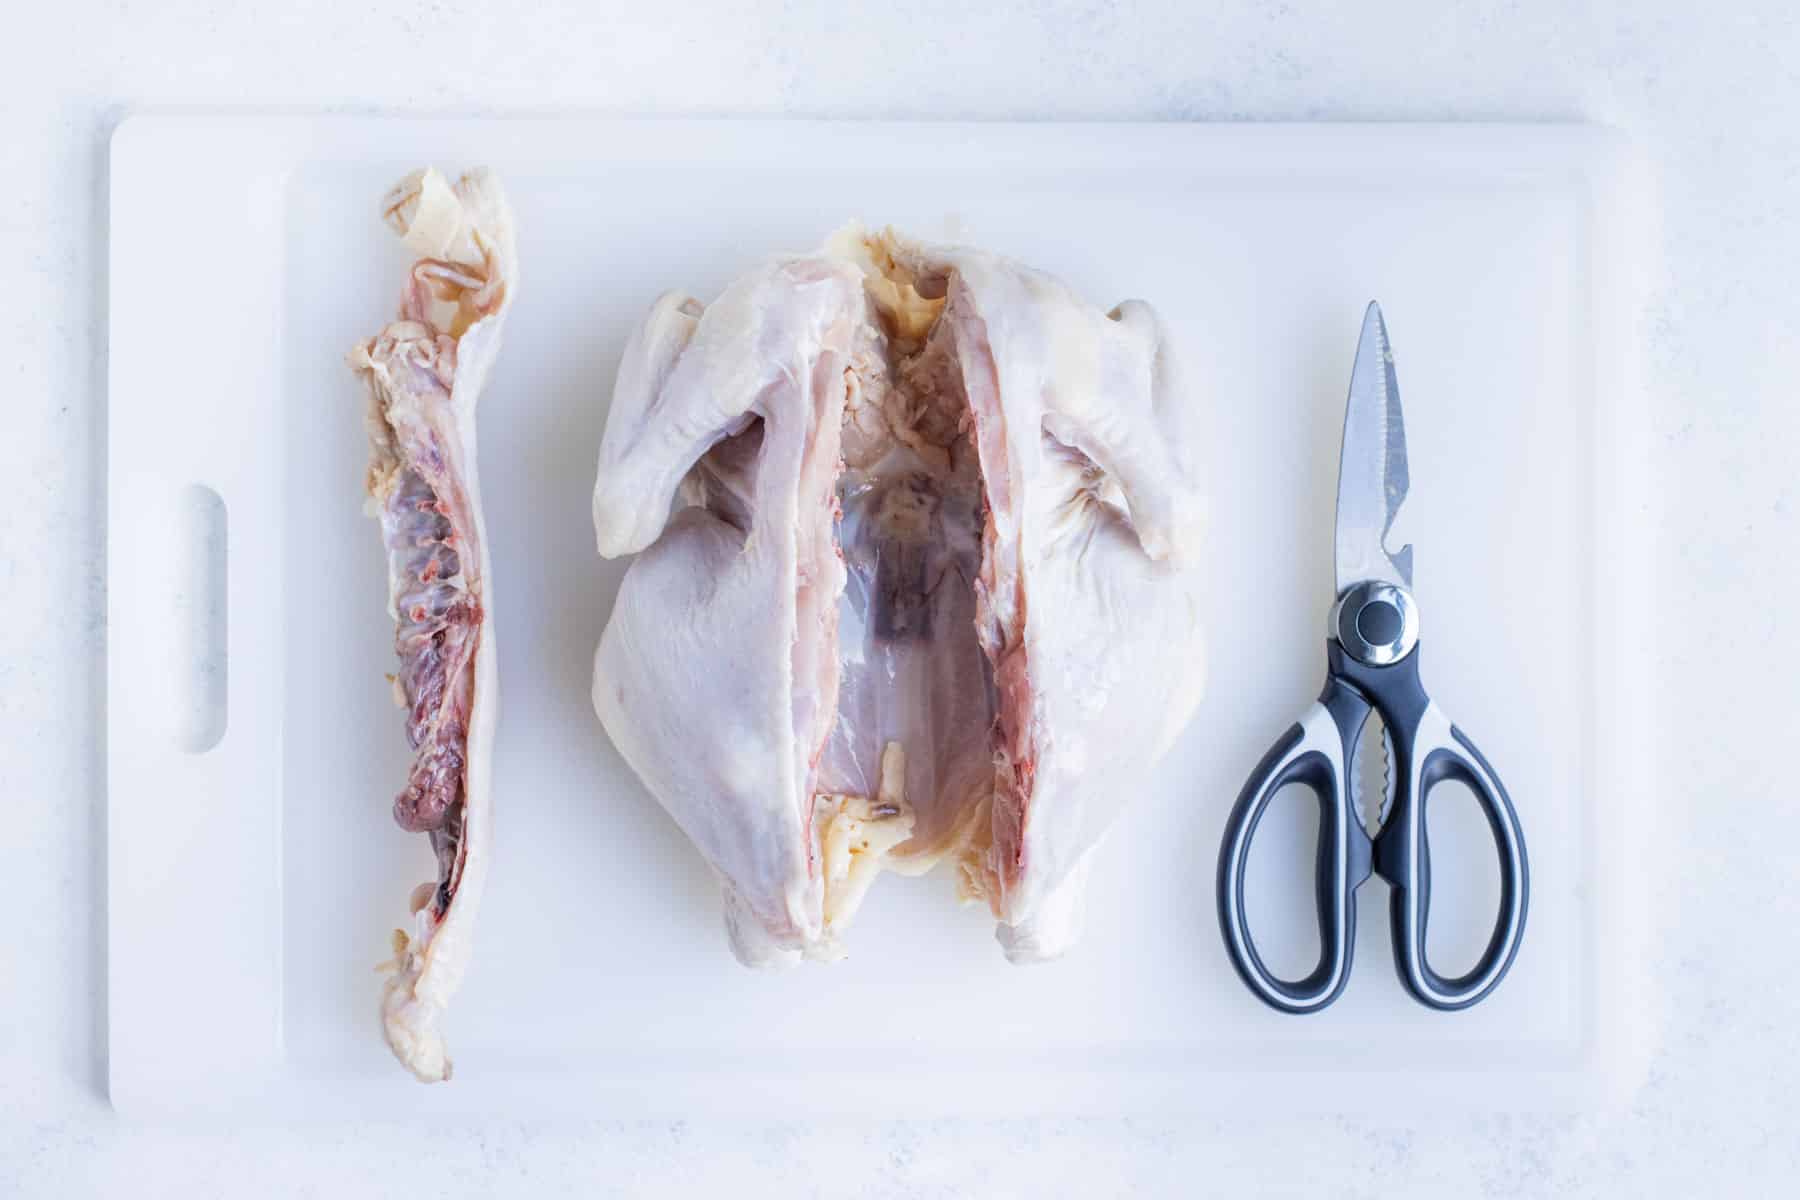 The spine is removed from a whole chicken with shears.